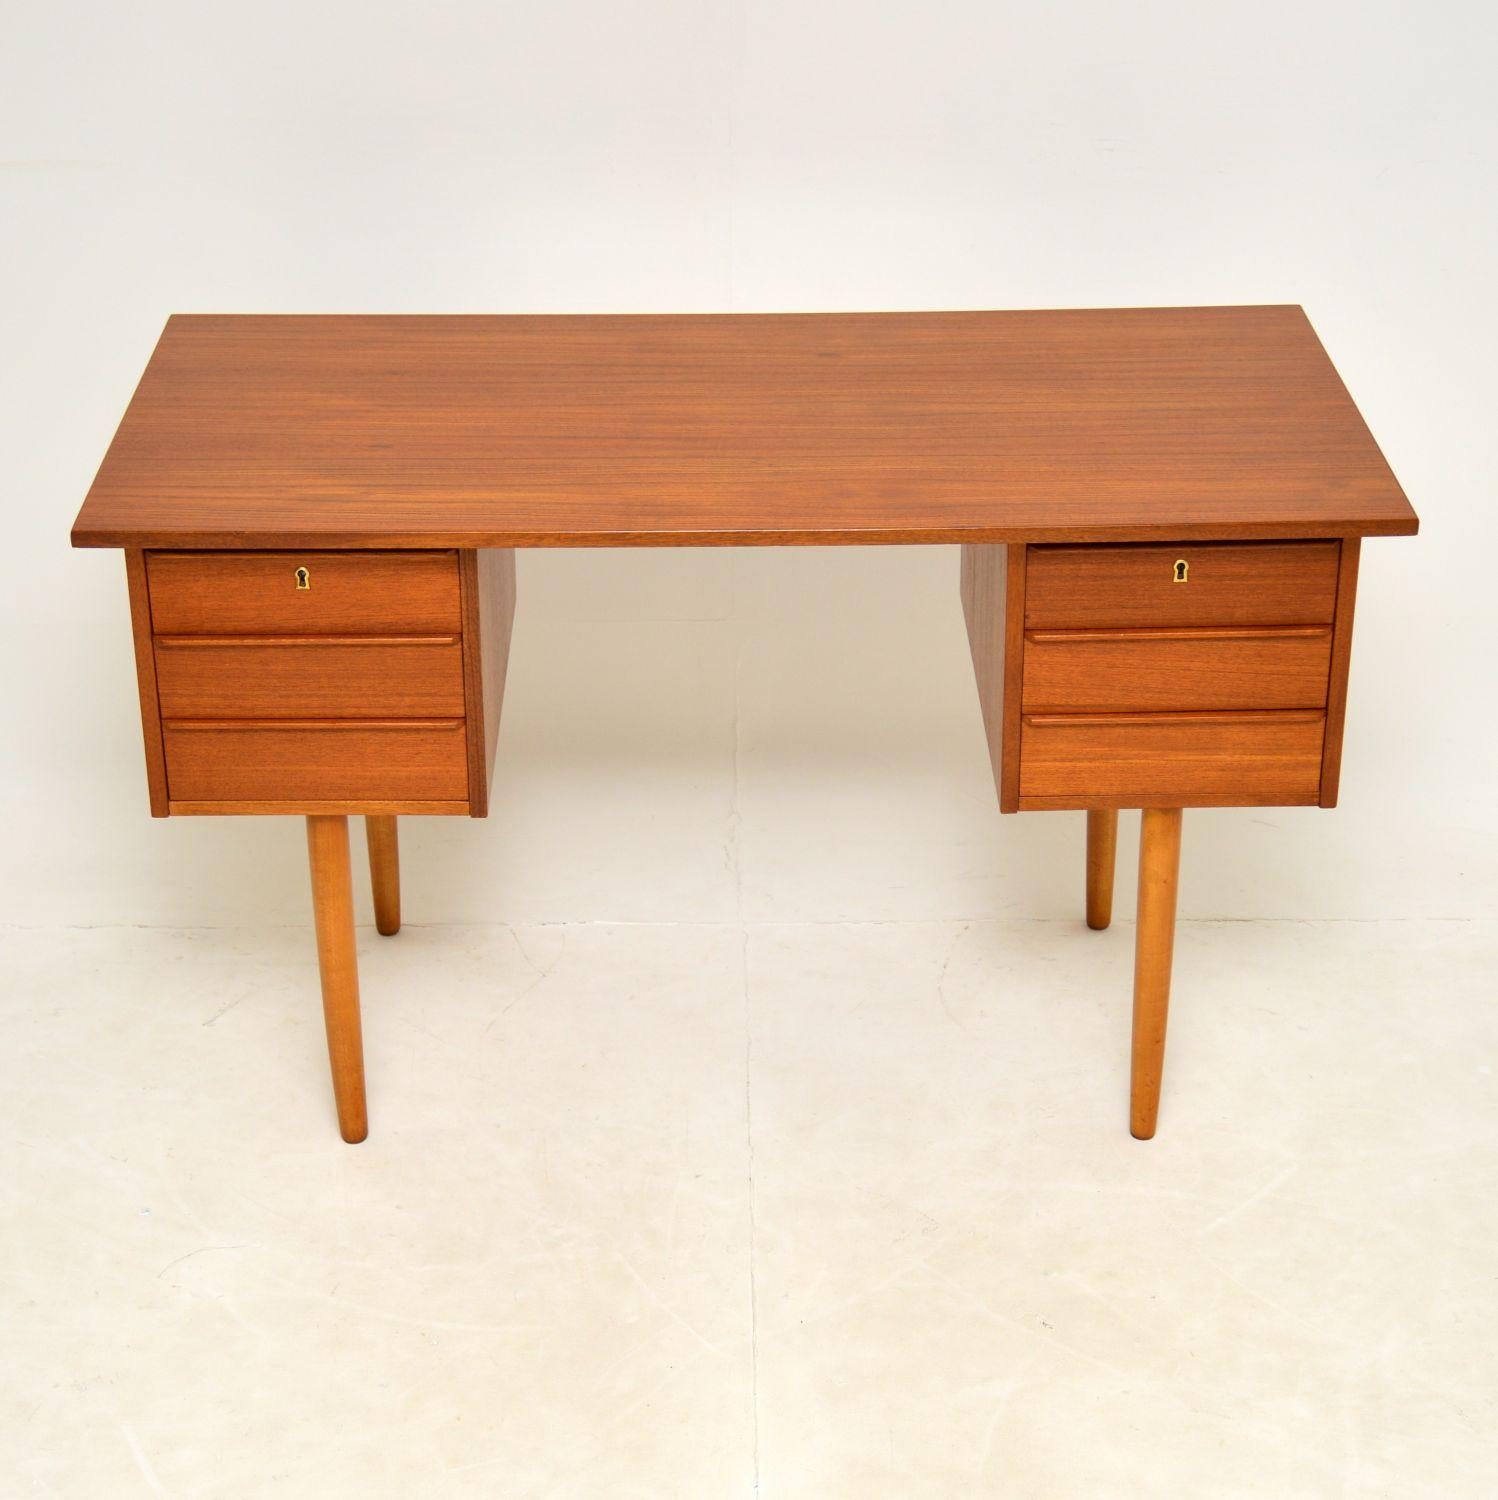 A stylish and very well made vintage desk in teak. This was made in Denmark, it dates from the 1960’s.

It is a lovely compact size, with a beautiful minimal design. The drawers have lipped handles, the desk sits on beautifully tapered legs, and